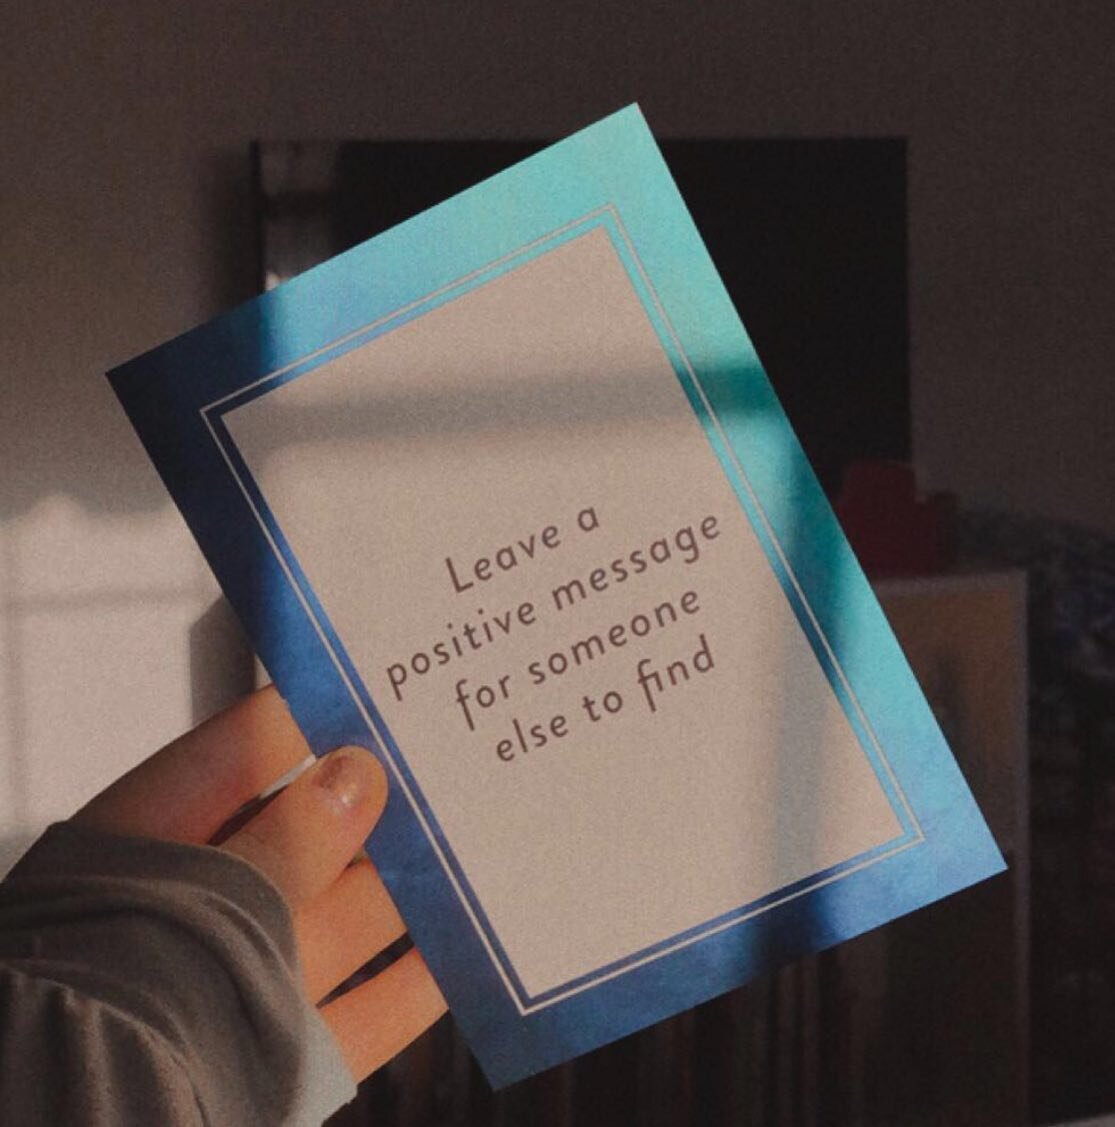 Your challenge for tomorrow - Leave a positive message for someone else to find 💕 How would you feel if someone else did this for you unexpectedly?
.
Love this card set @zen_with.jen gifted to me (: